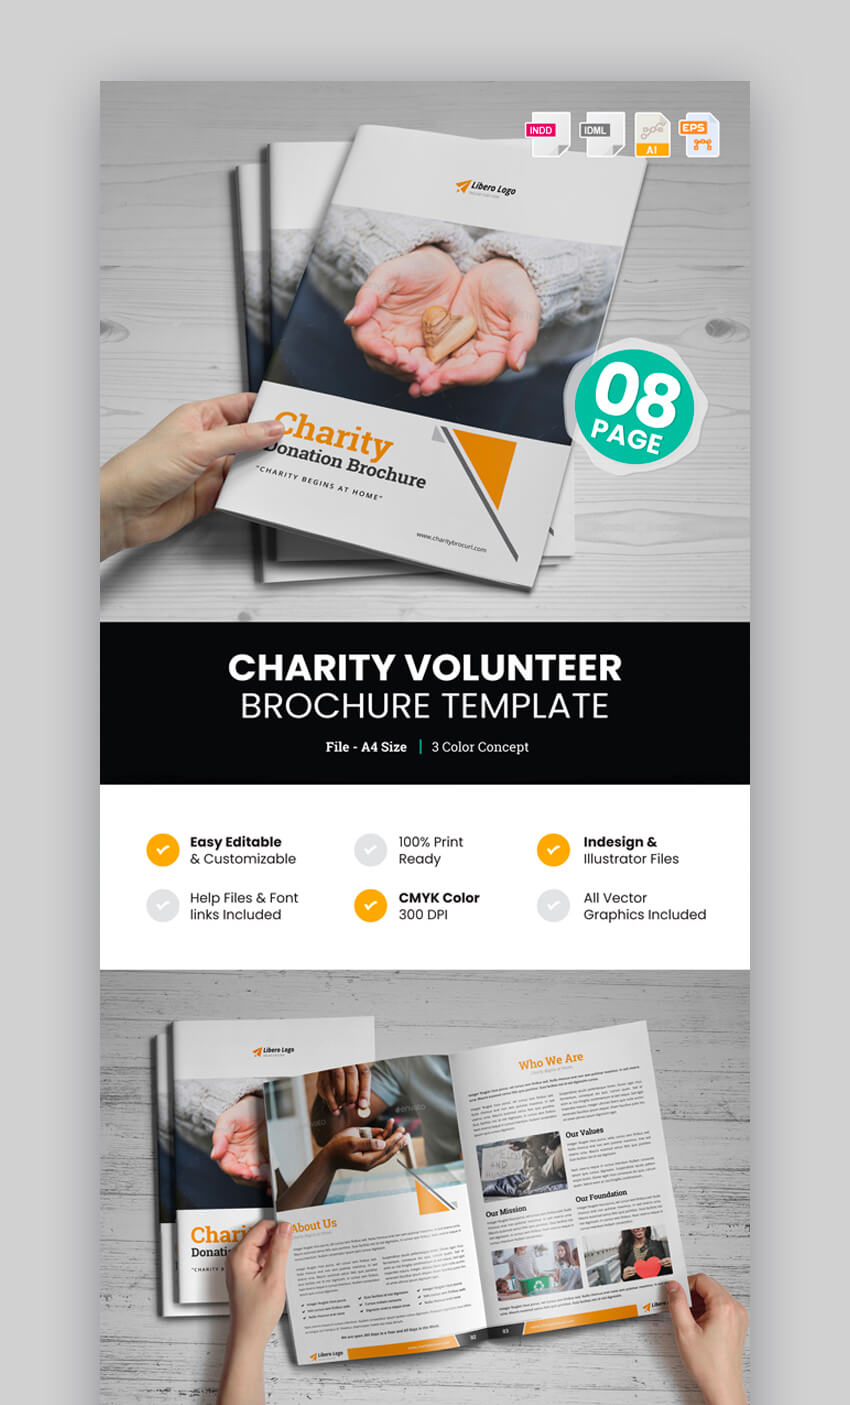 20 Best Professional Business Brochure Design Templates For 2019 Pertaining To Volunteer Brochure Template